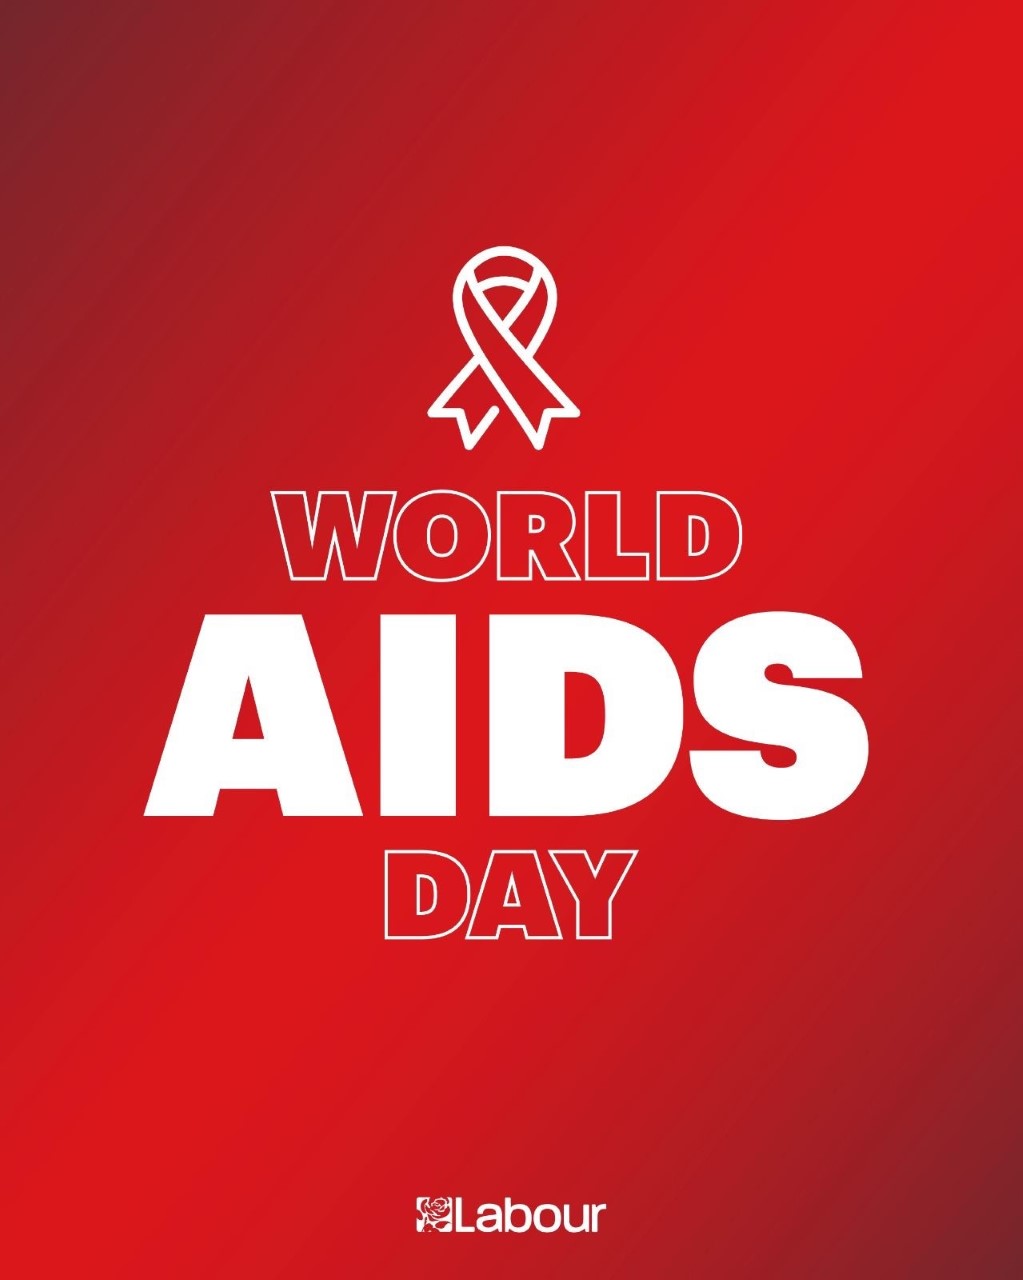 Graphic with red background and "World AIDS Day" written in white text underneath an icon of the World AIDS Day ribbon